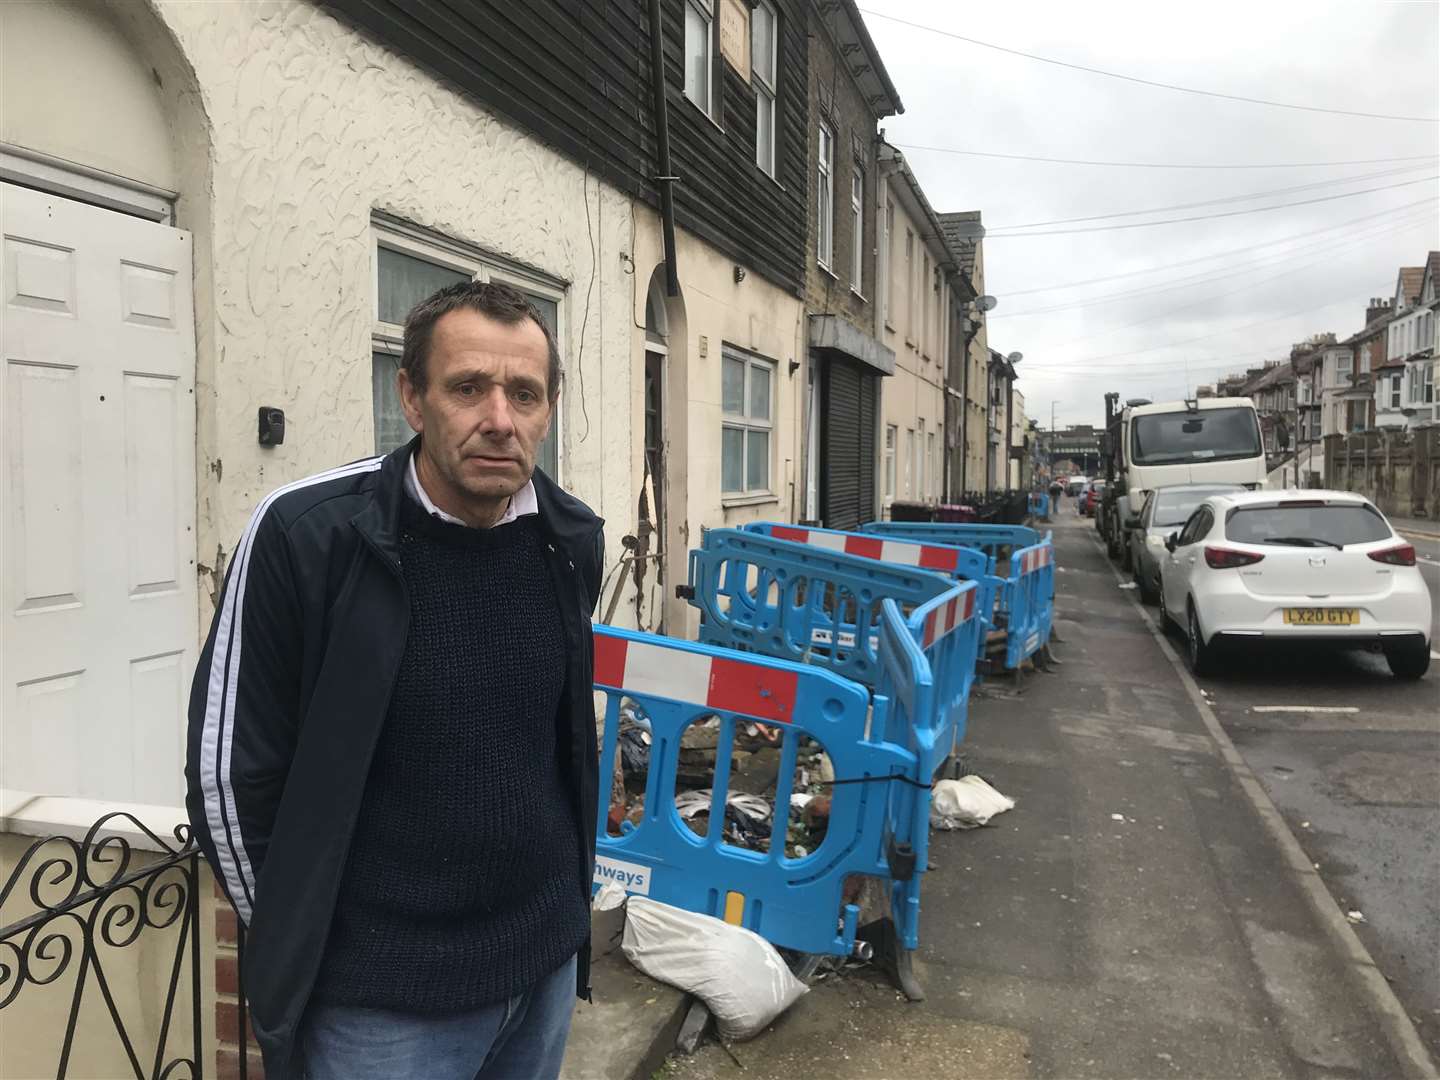 Peter Petersen said action needed to be taken to improve safety on Luton Road